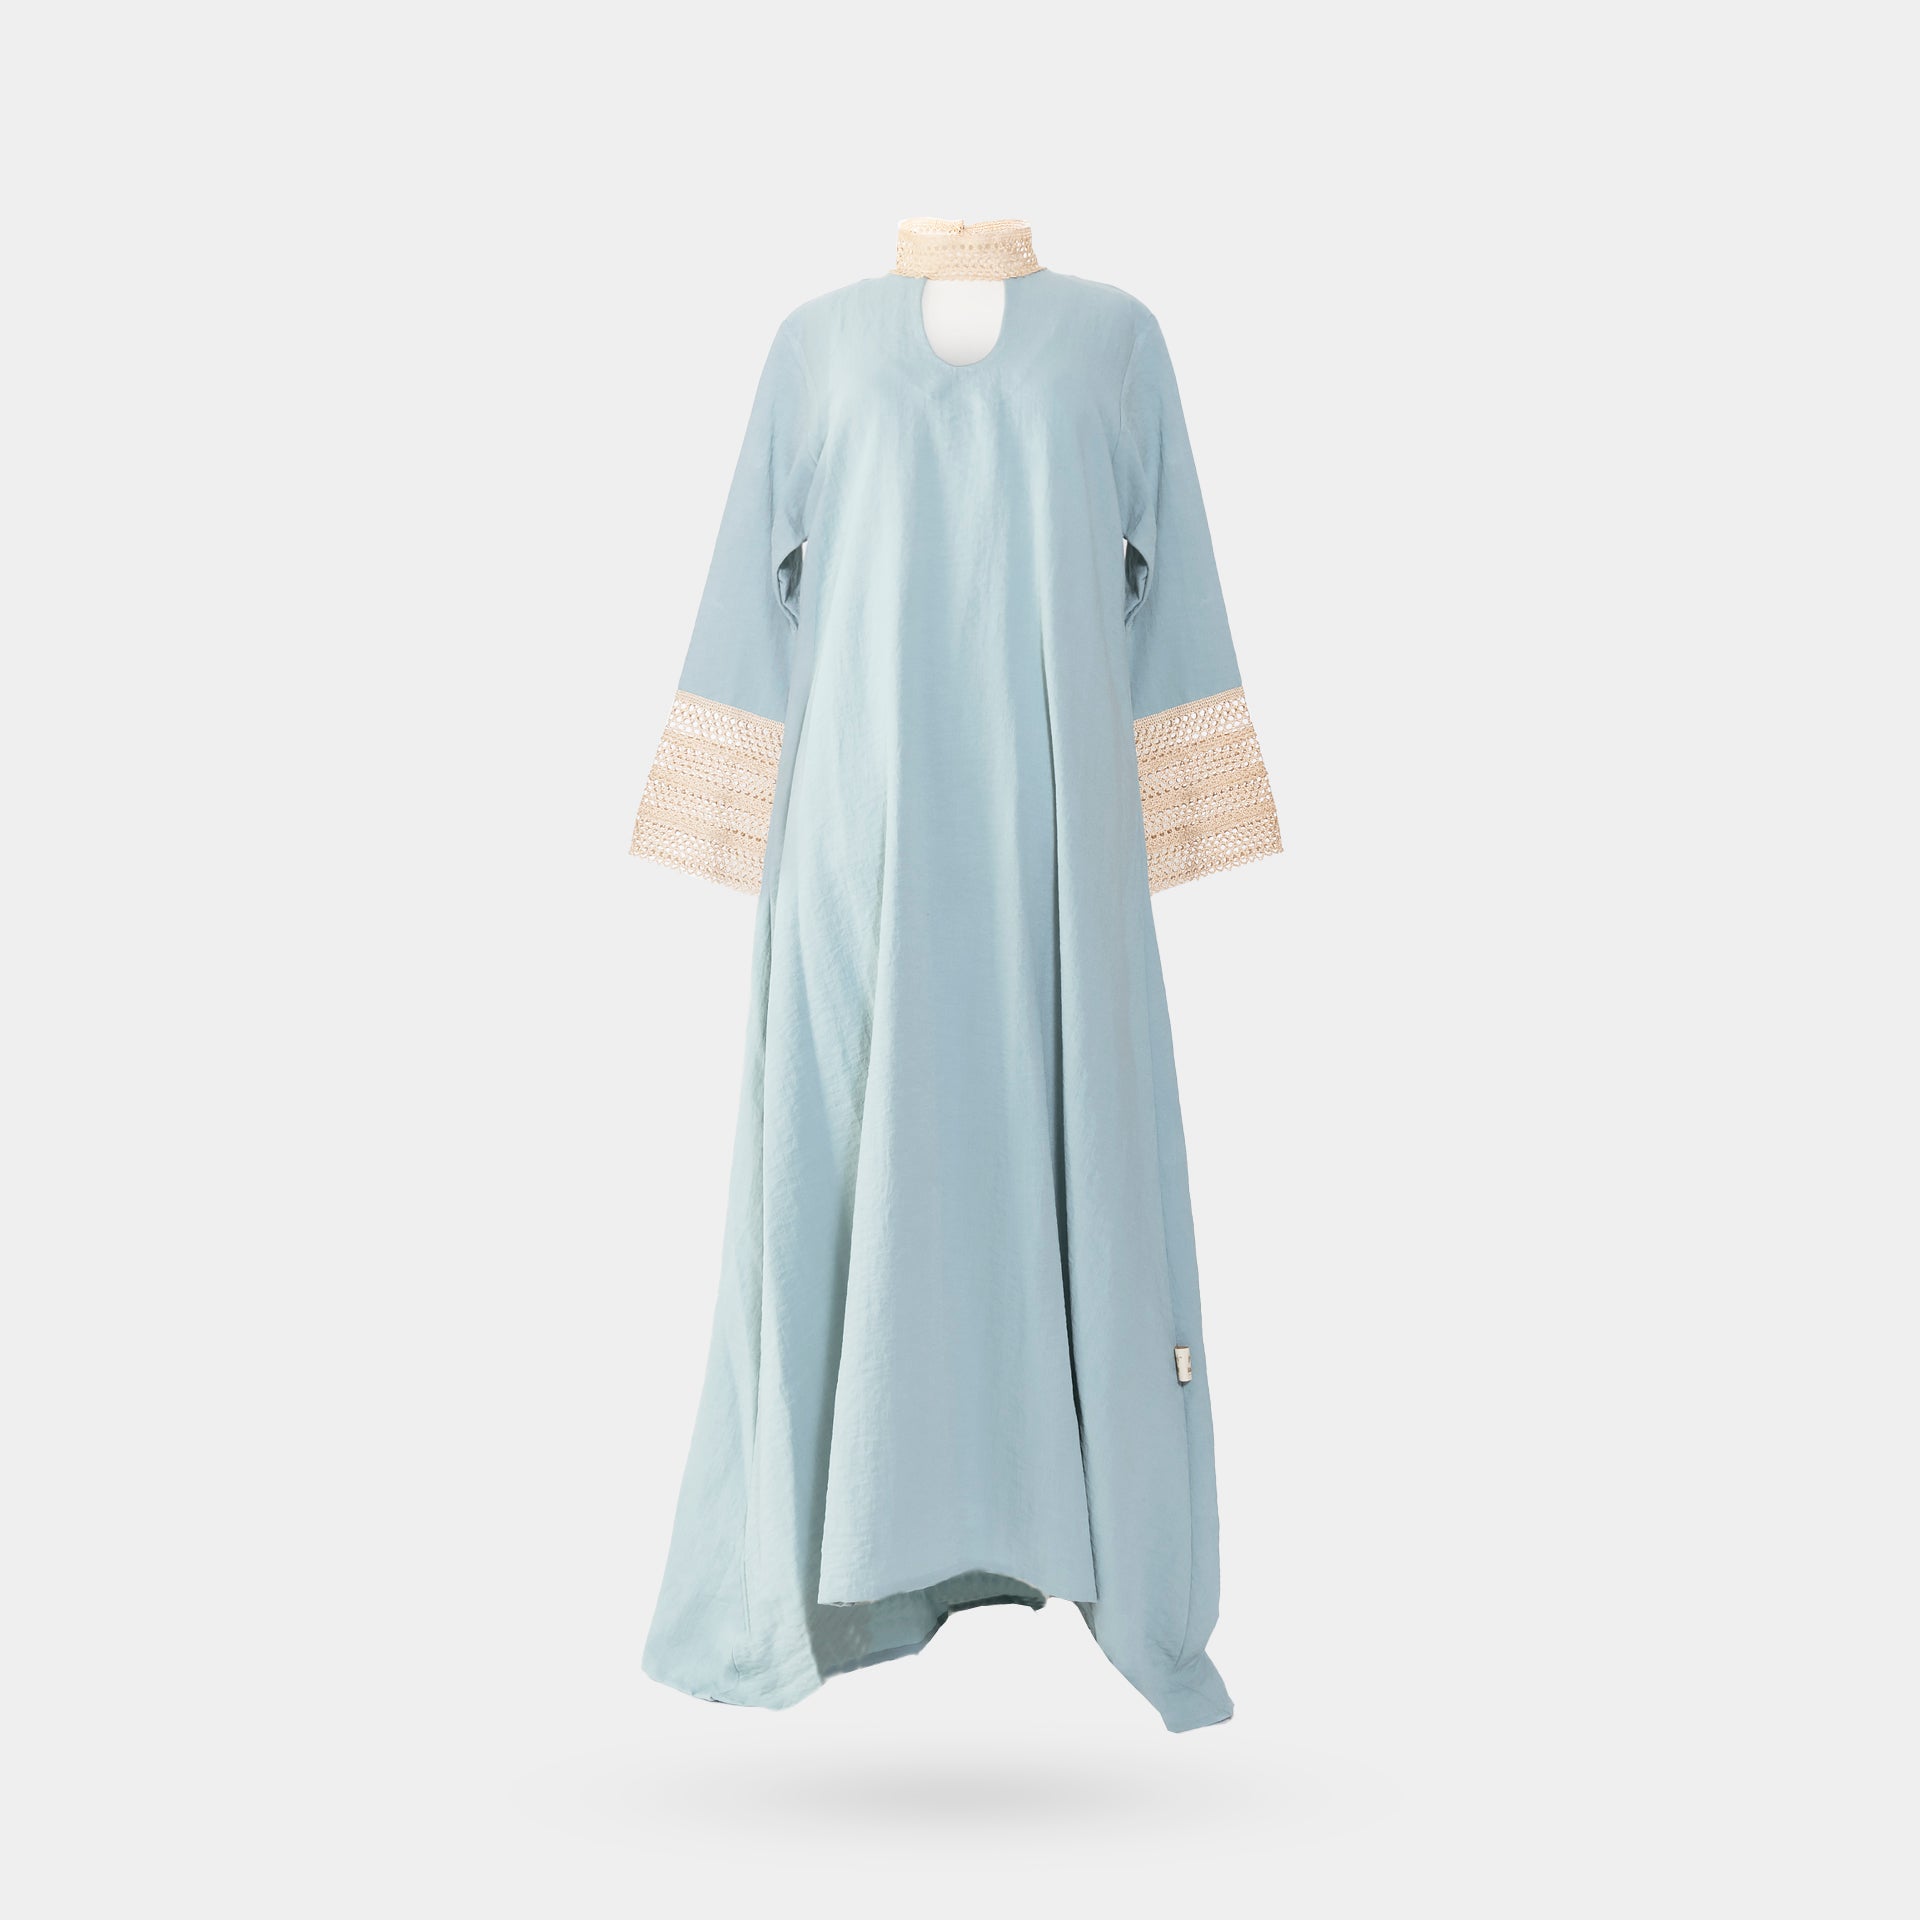 Light Blue Long Dress with Beige Embroidery on the Neck and Sleeves From Darzah